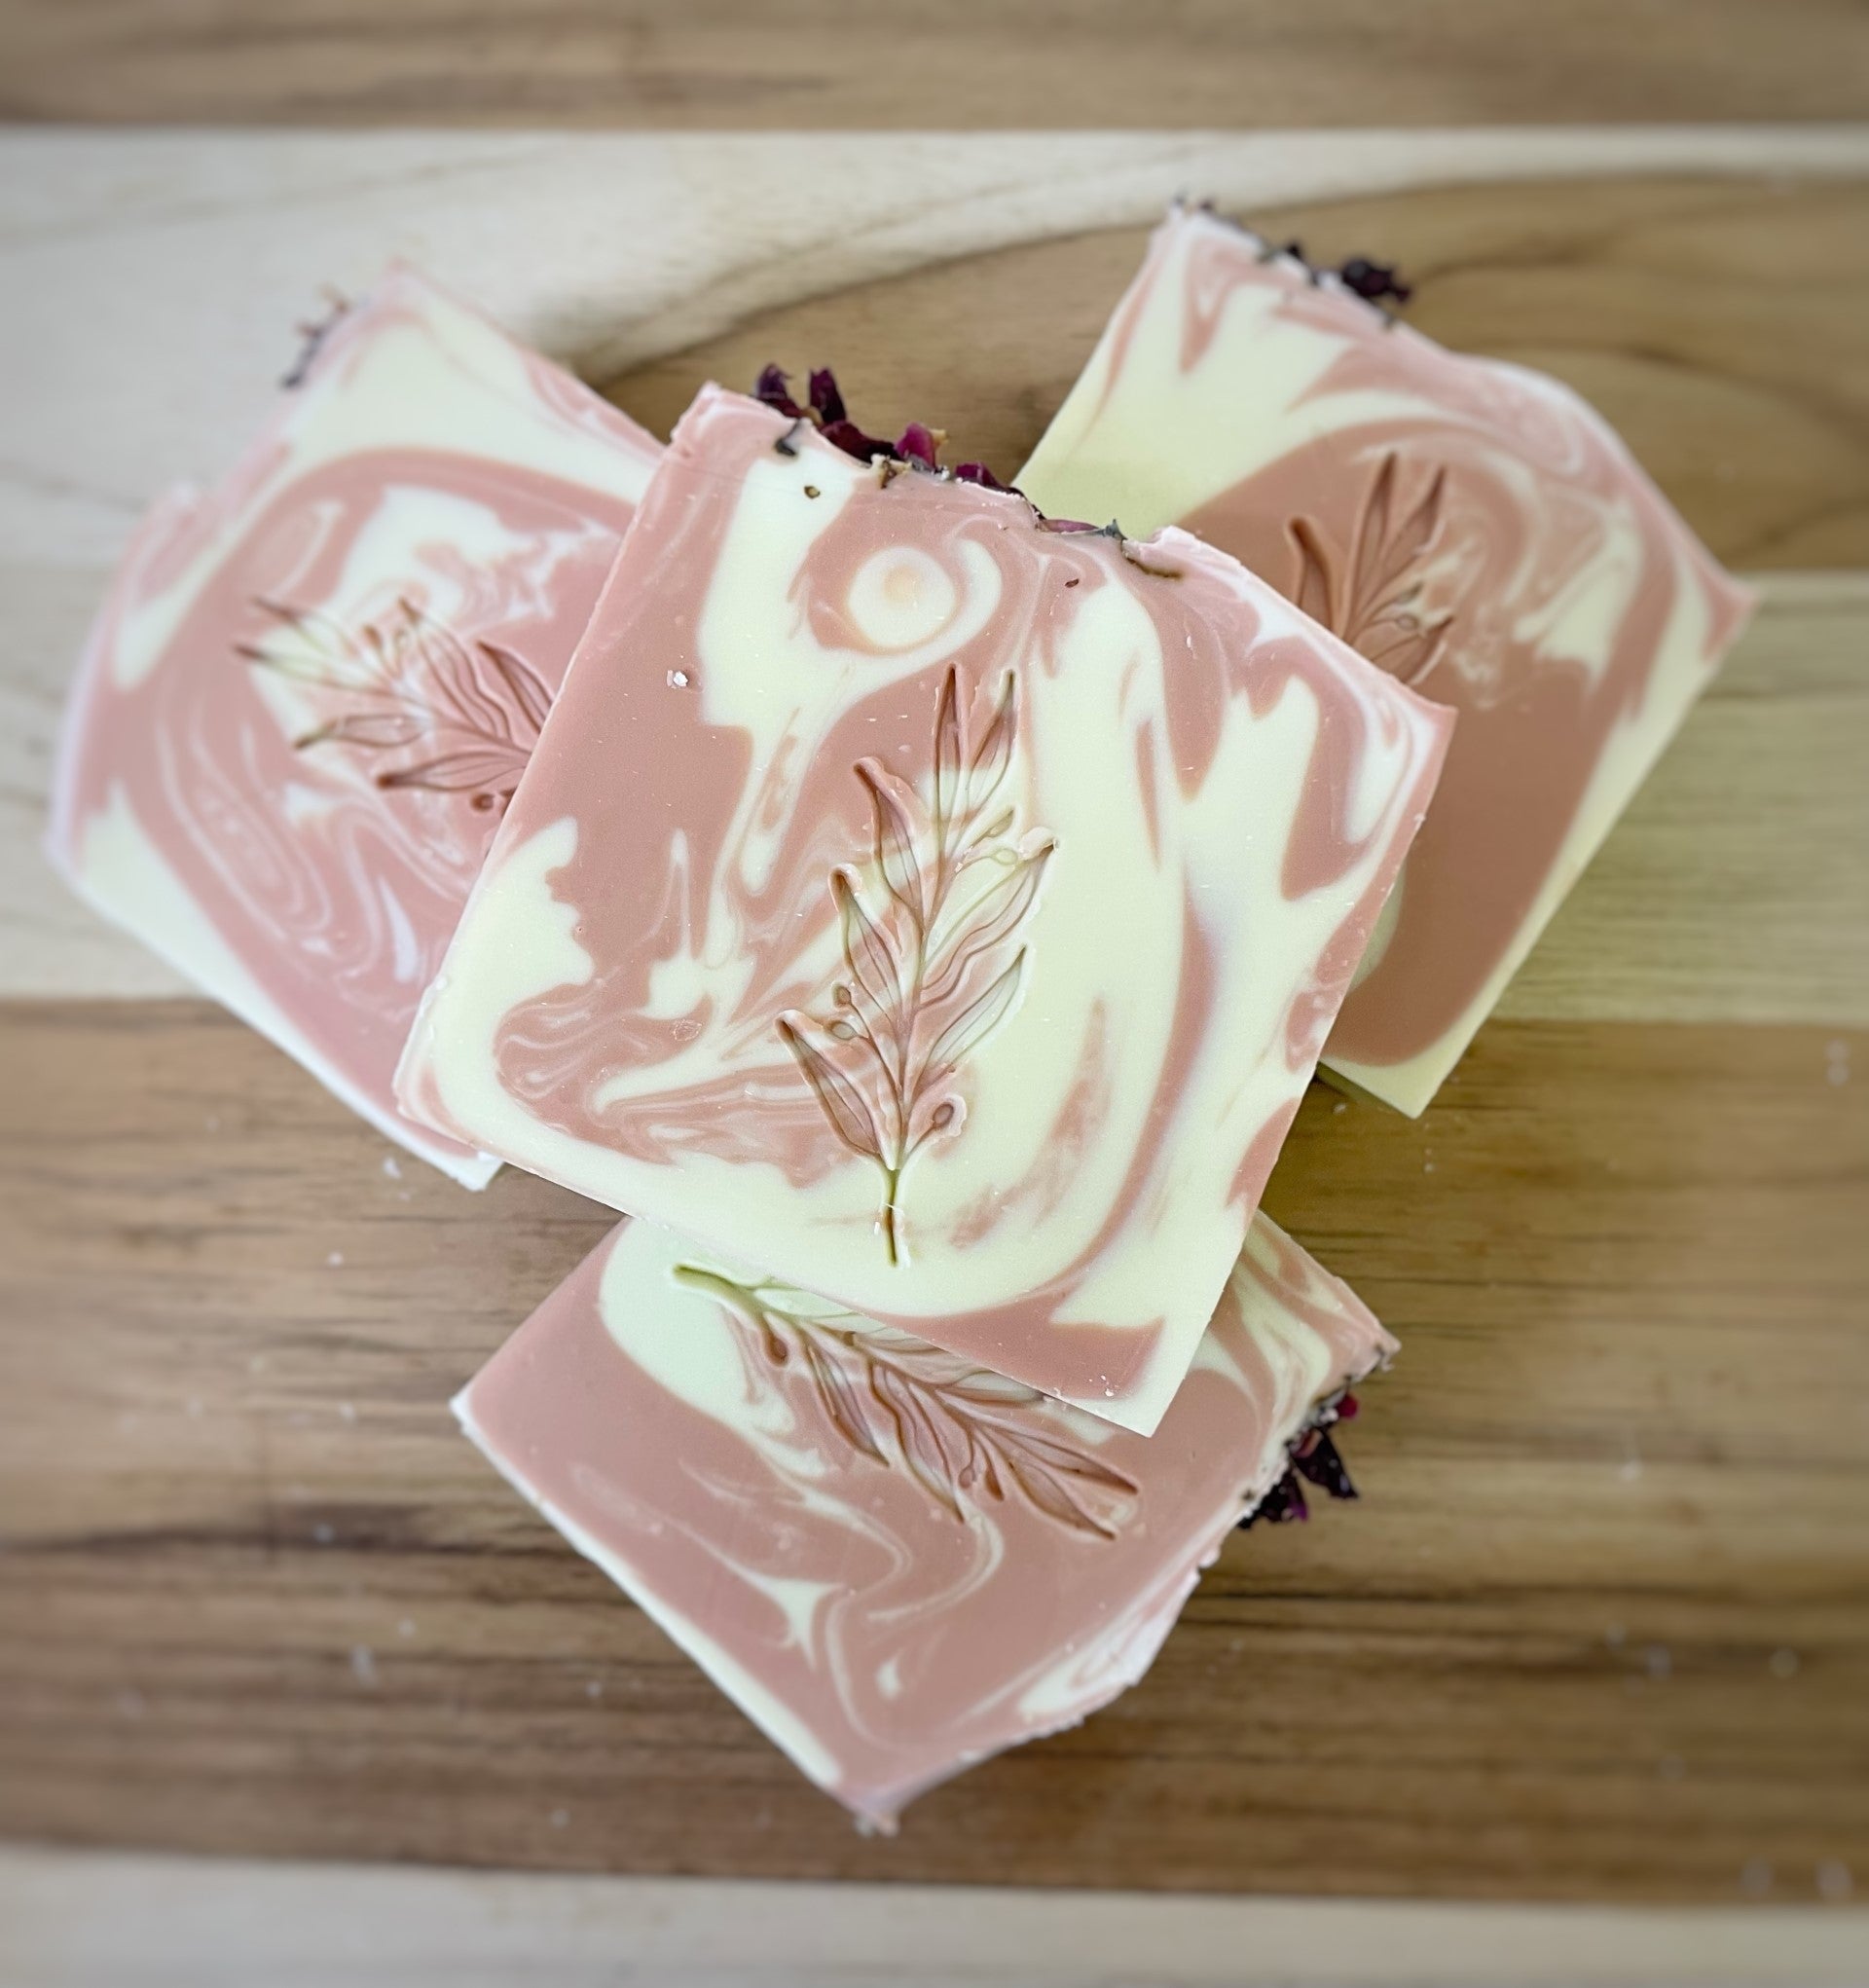 Handcrafted artisanal soap bars with a pink and cream swirl design, embellished with botanical elements on a wooden surface.